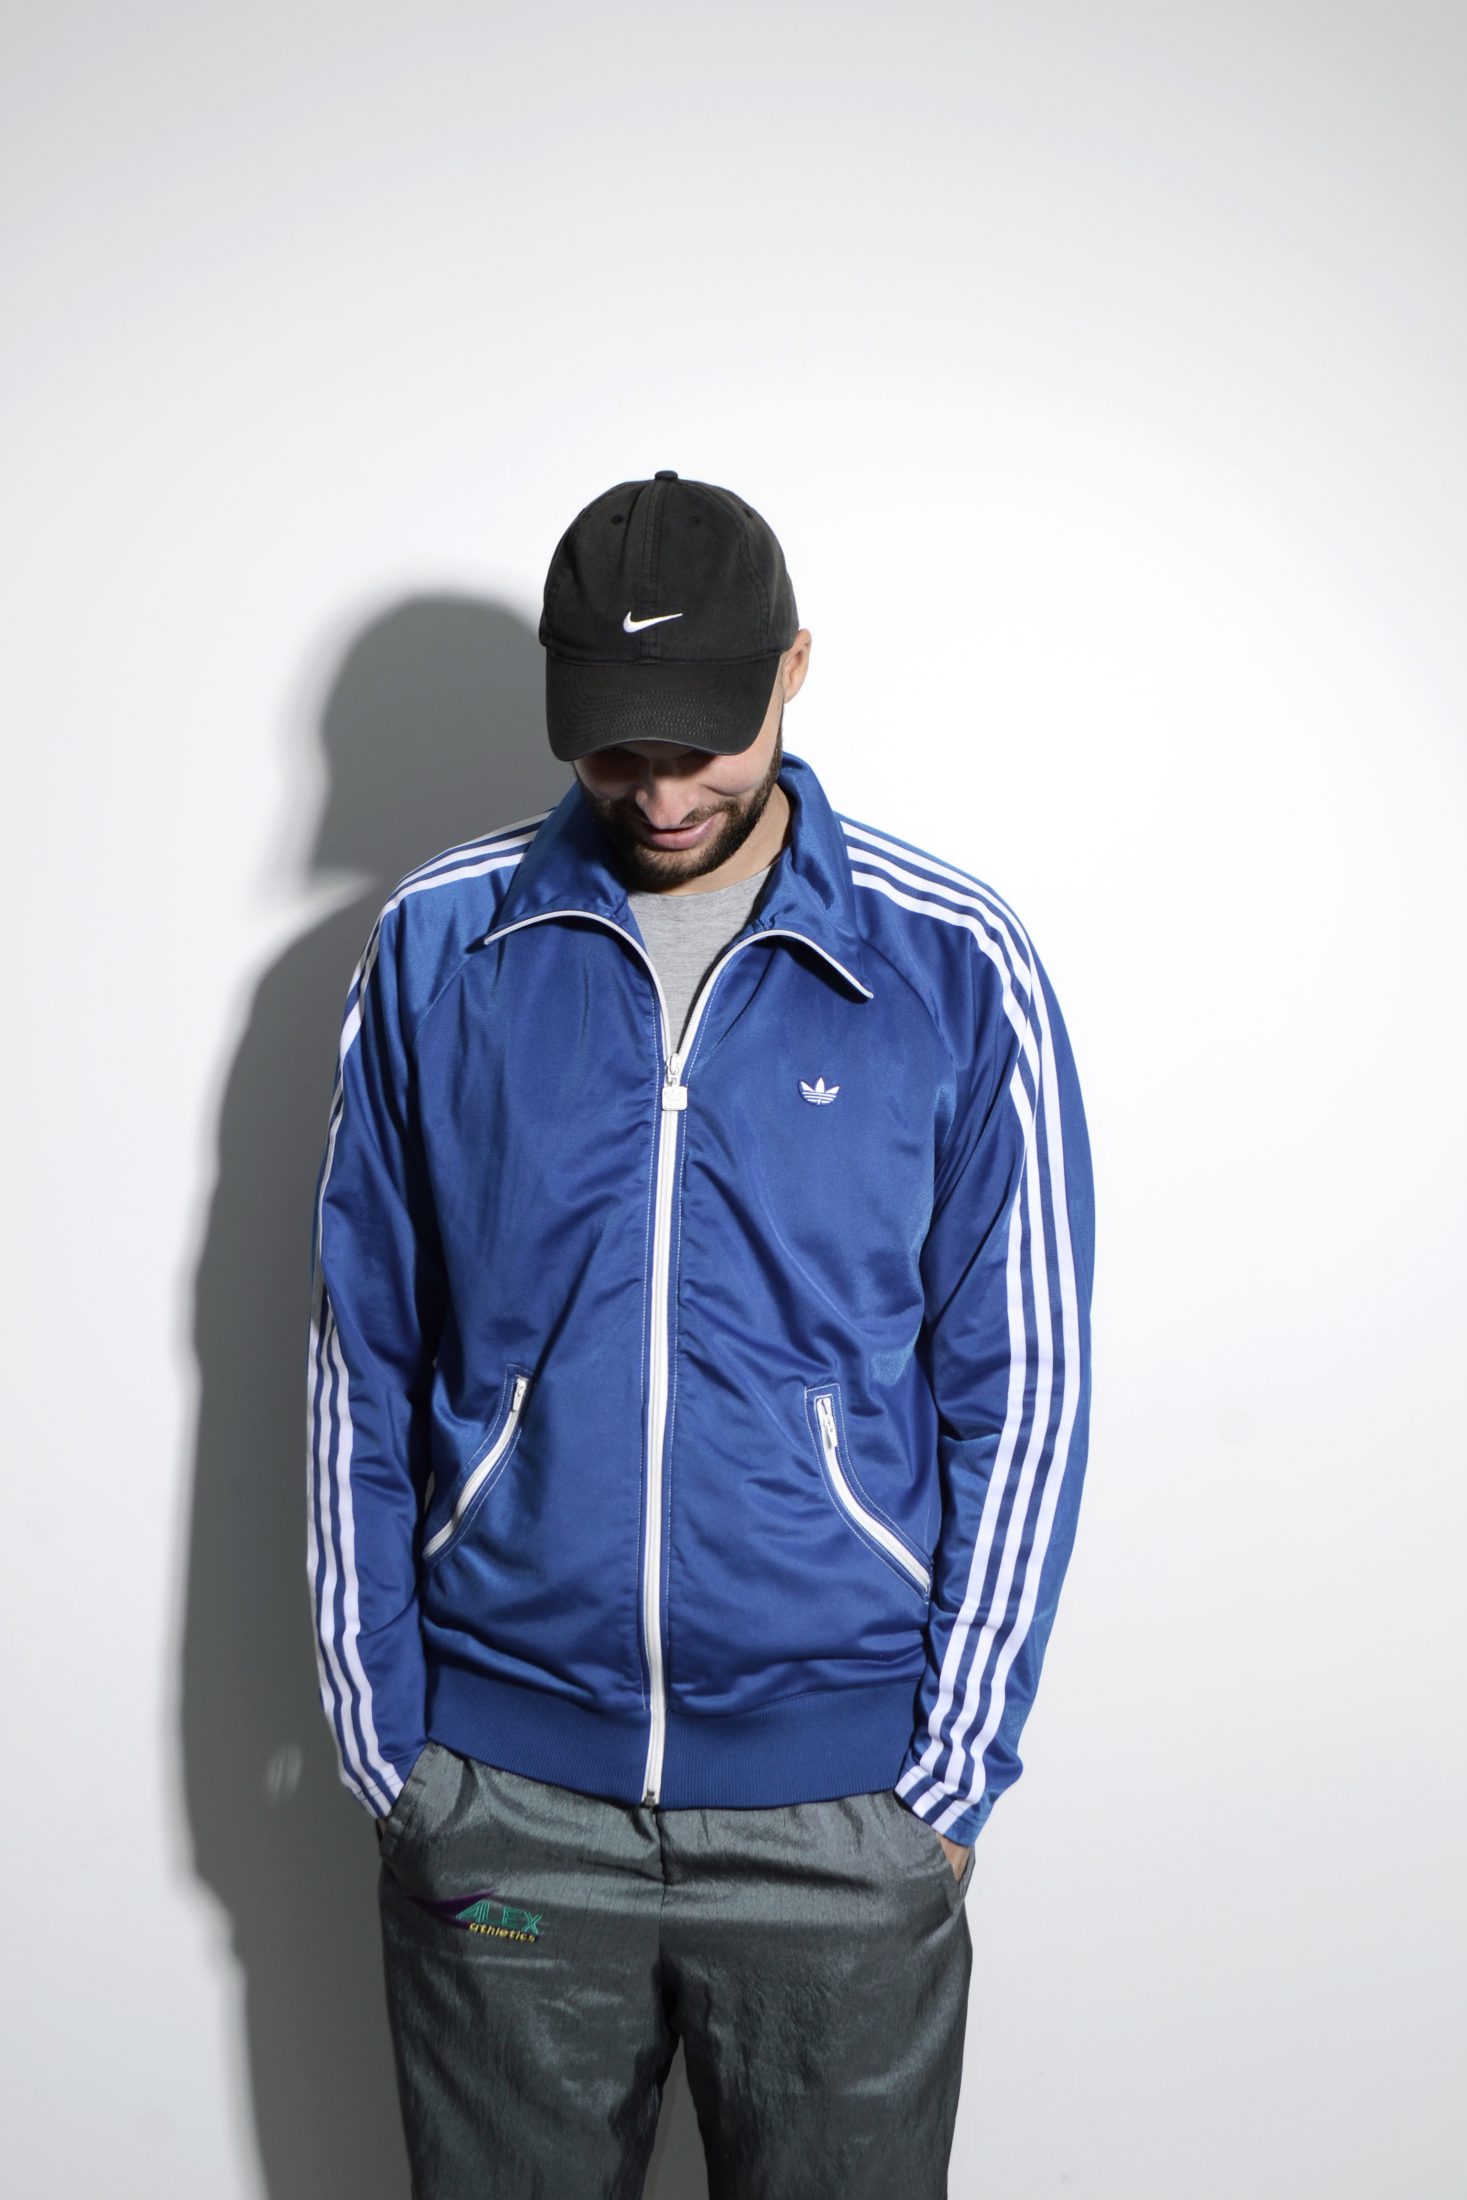 ADIDAS retro 70s style track jacket in blue